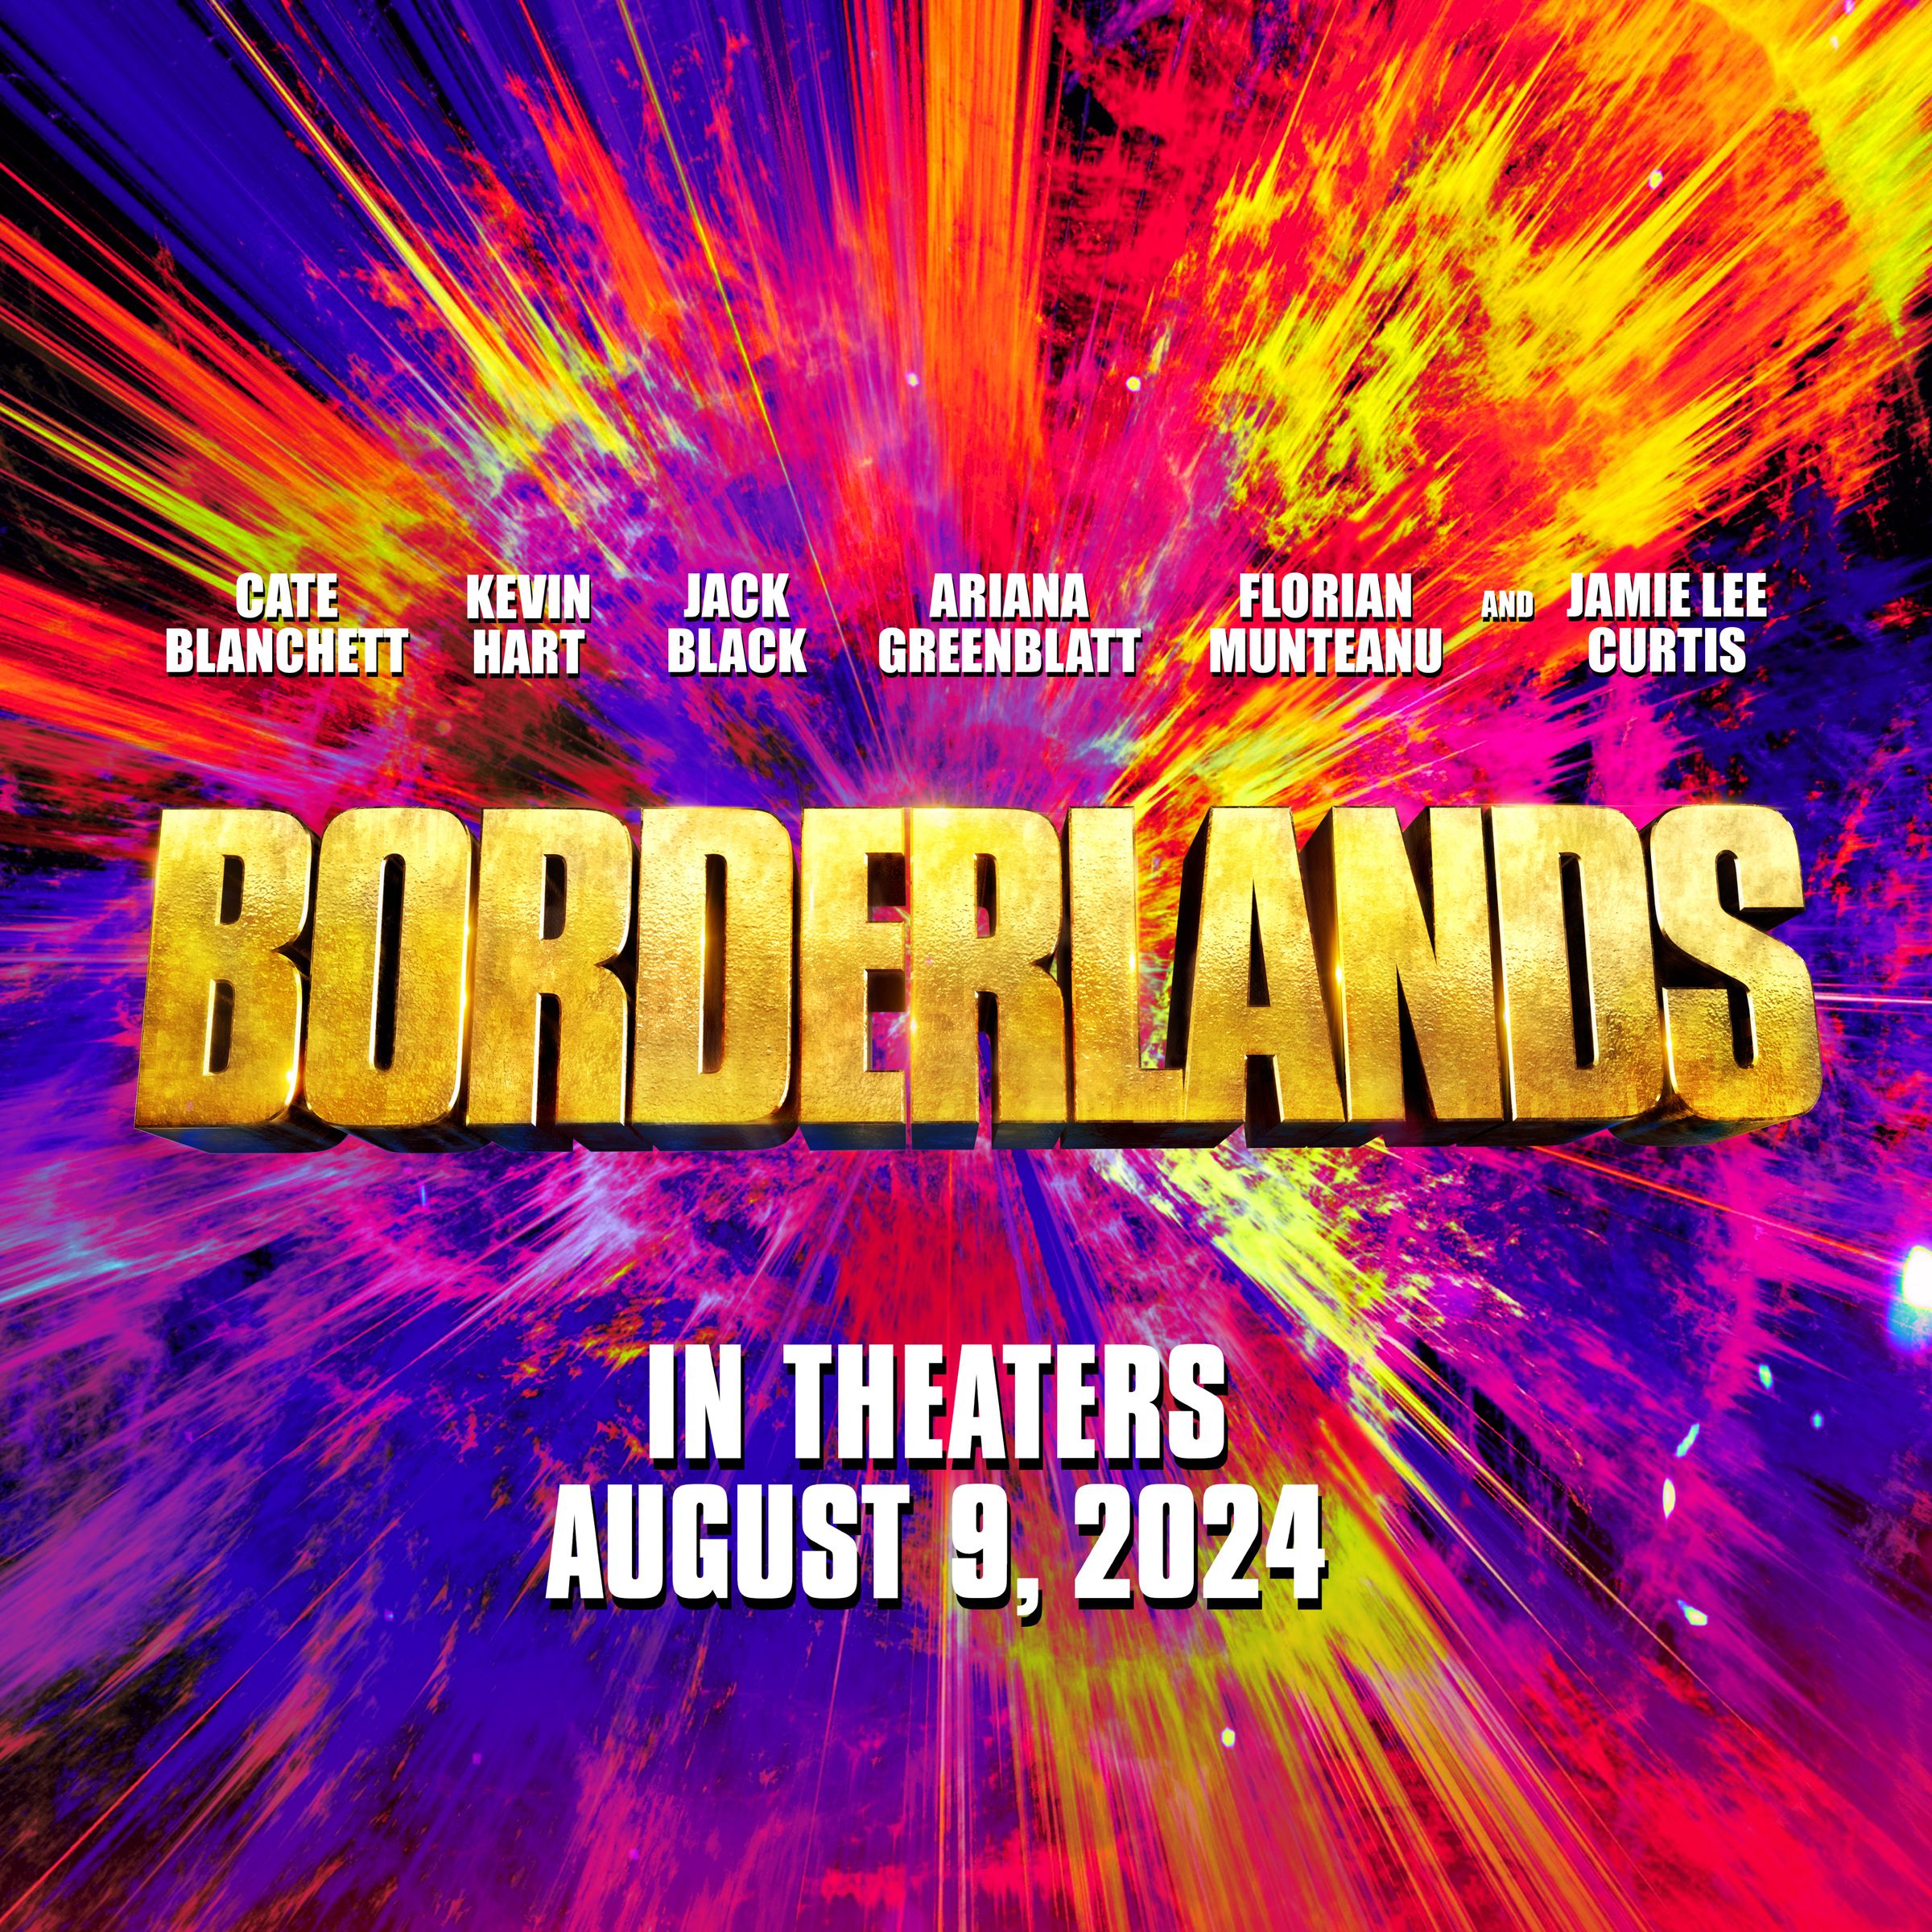 An image about the Borderlands movie that includes the film’s release date and starring actors.